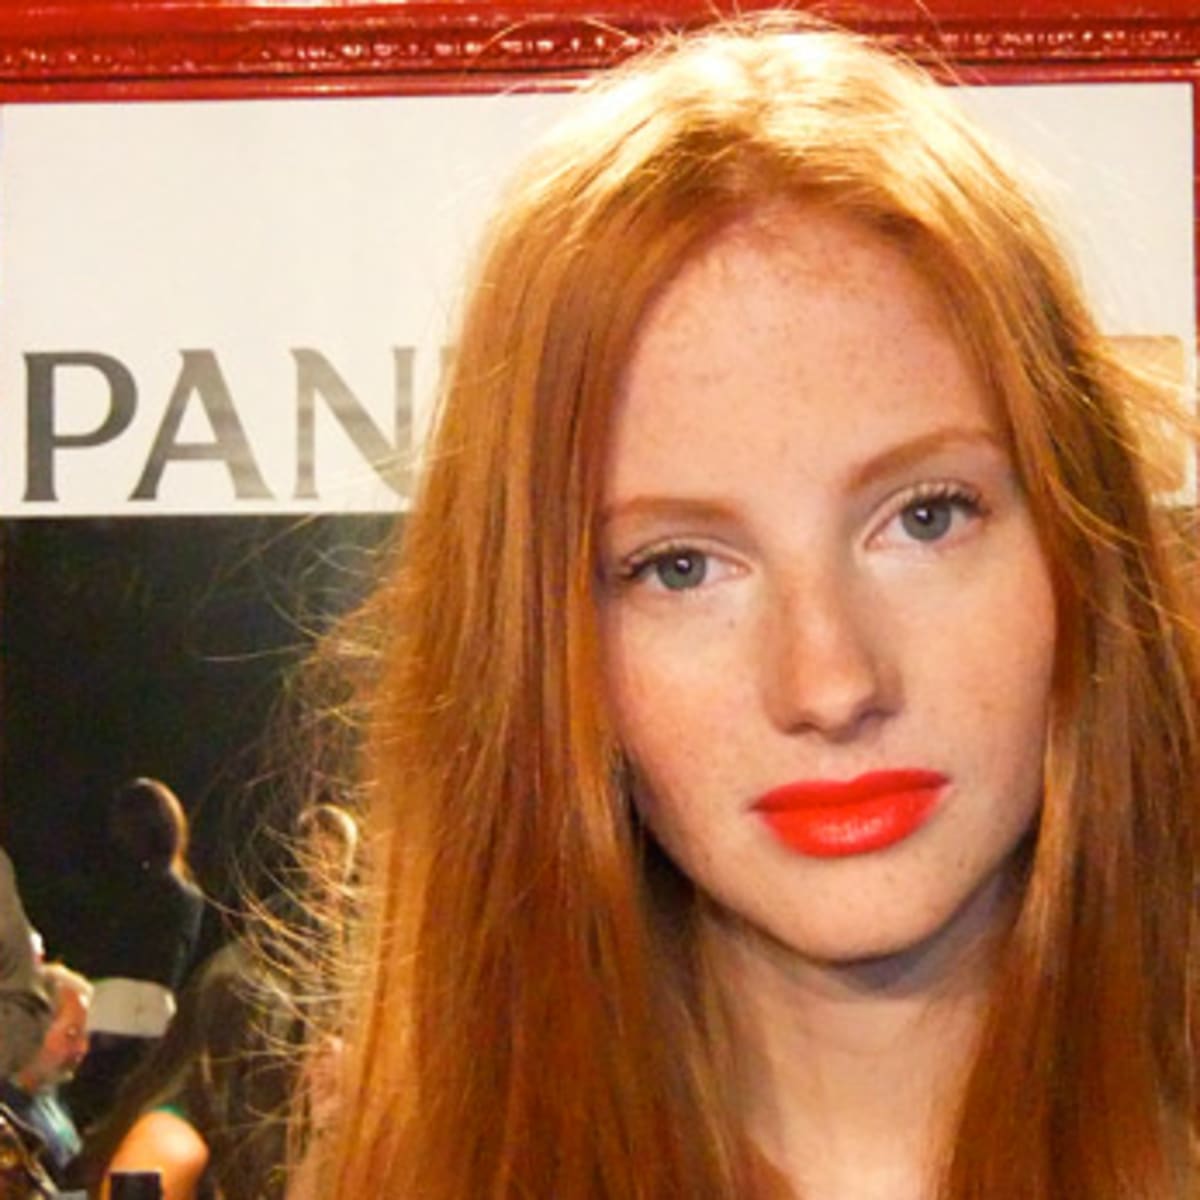 Red Hair, Red Lips: Oh YES, you CAN! - Beautygeeks